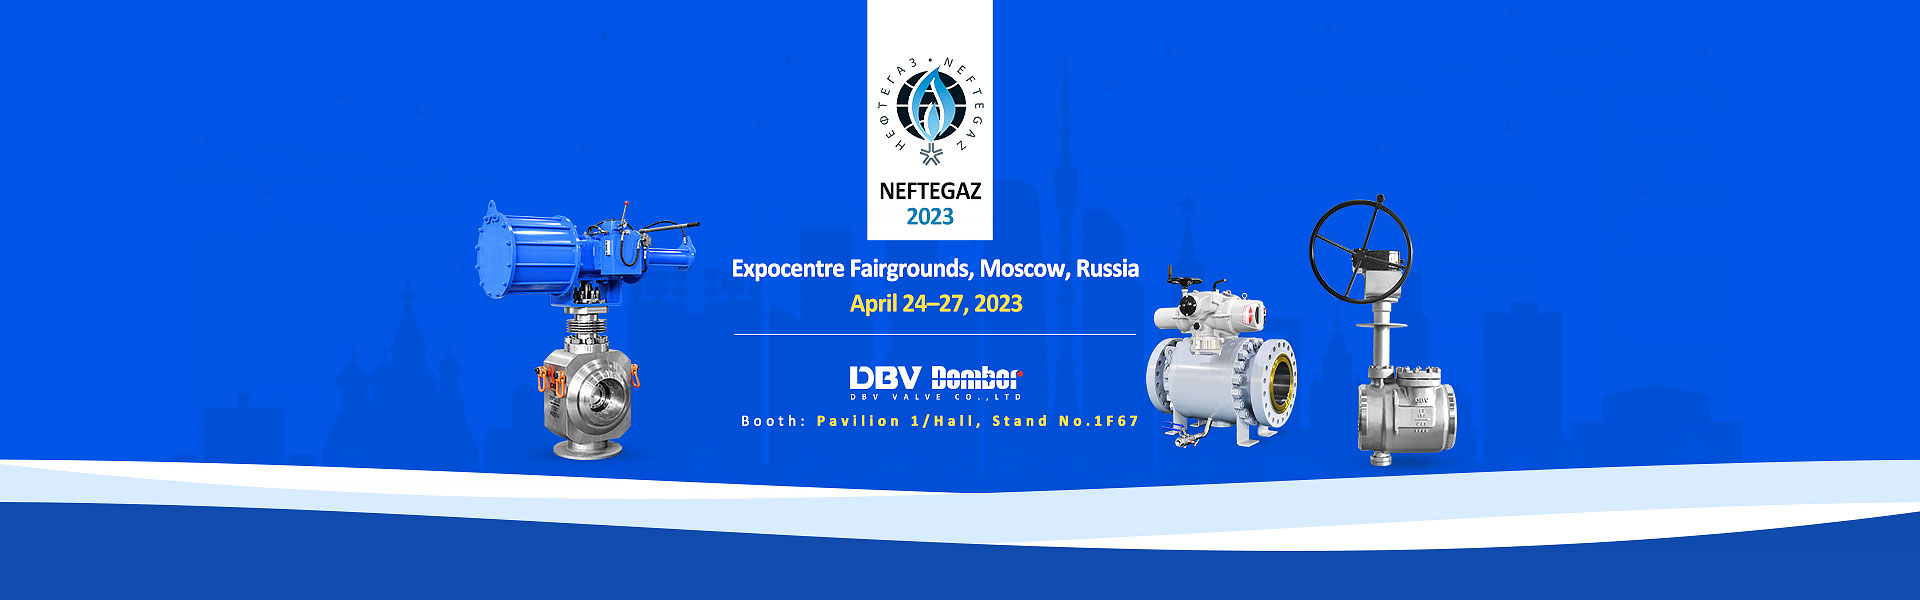 NEFTEGAZ 2023 22nd International Exhibition for Equipment and Technologies for Oil and Gas Industries